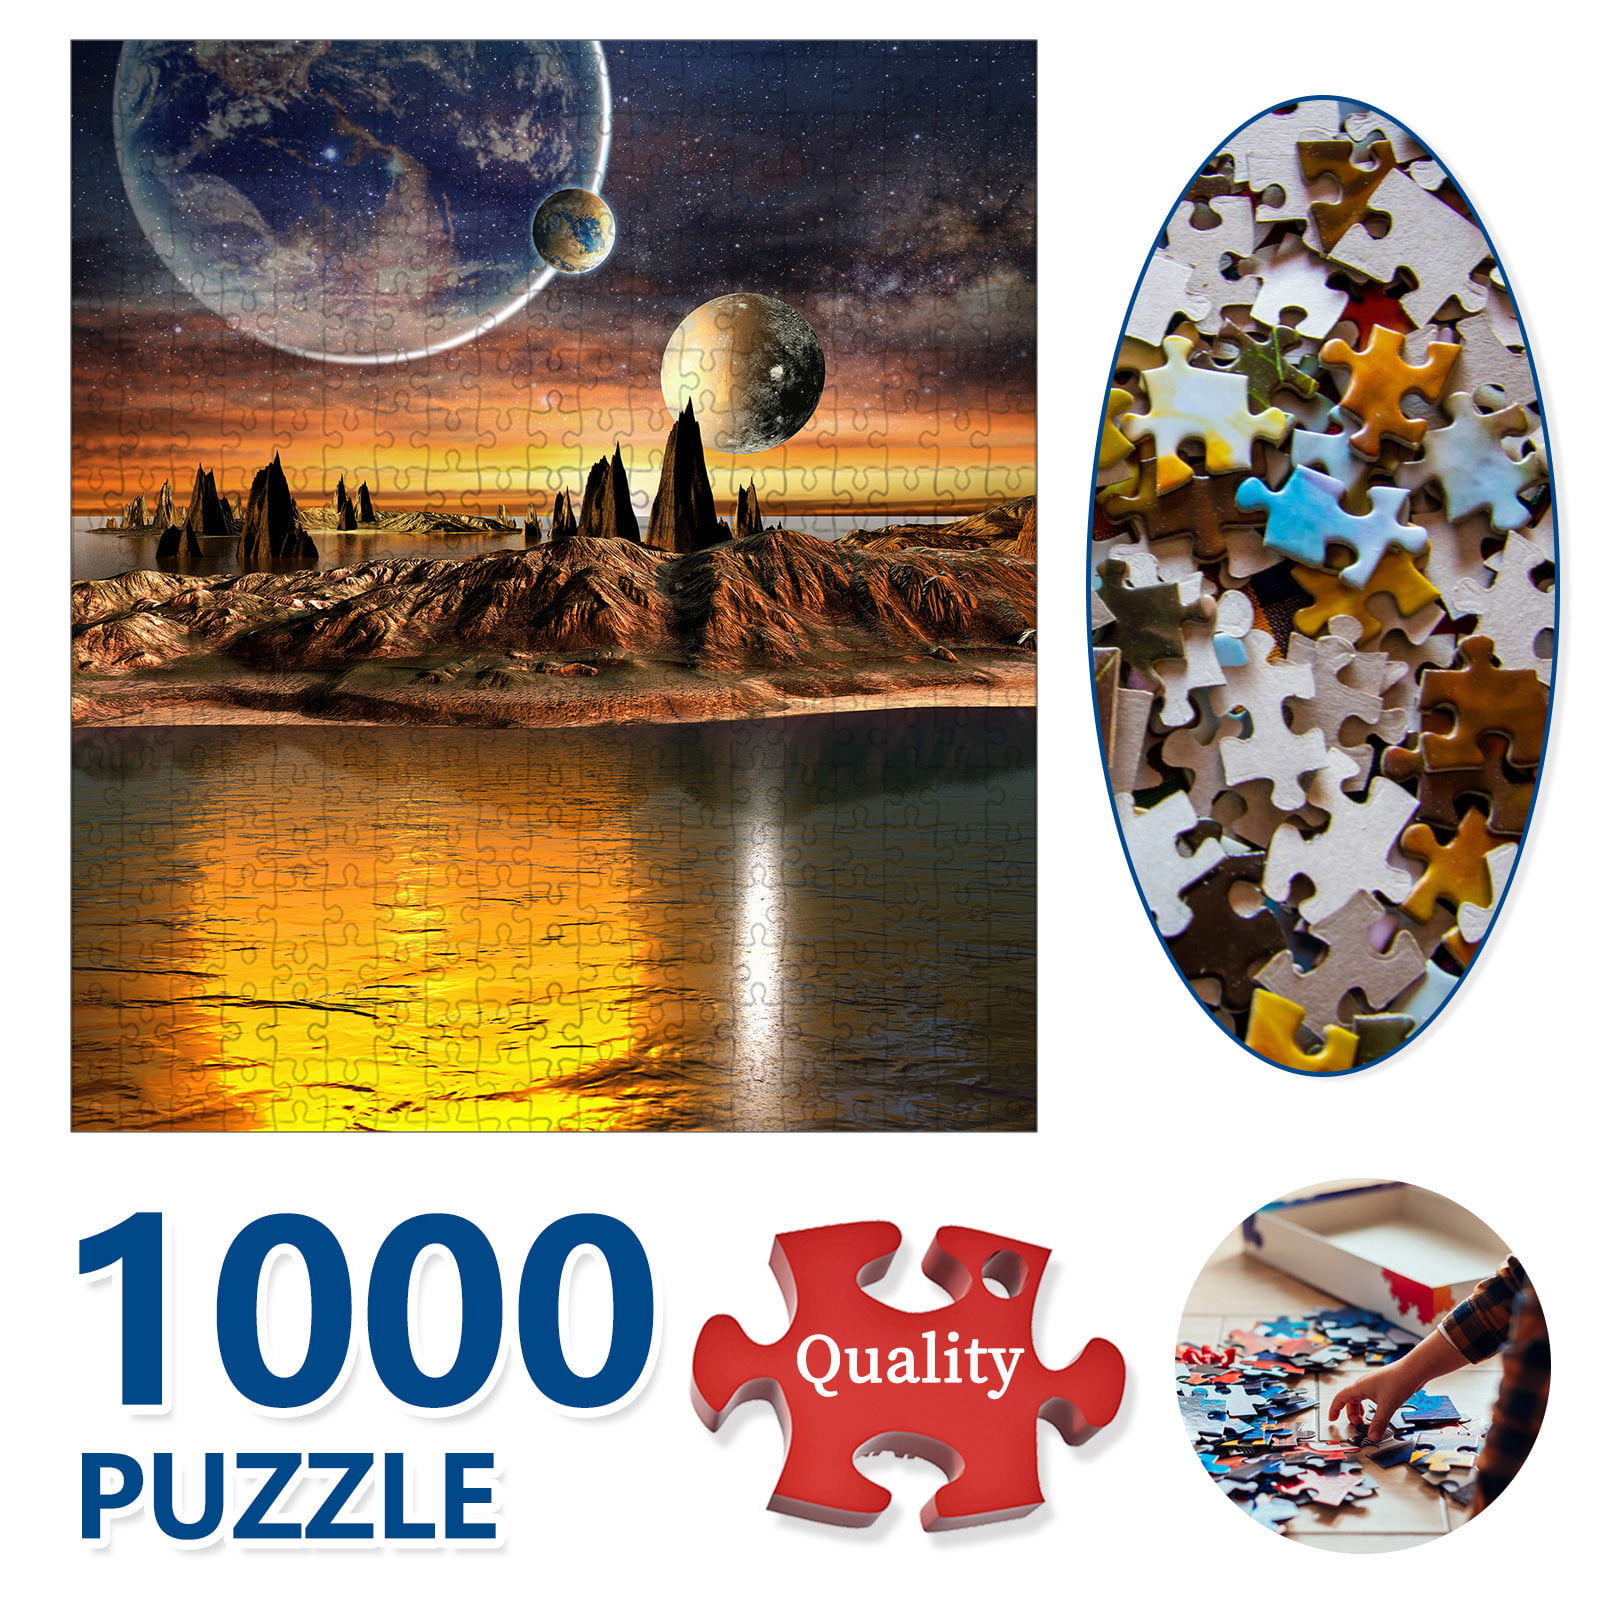 Gift for Family and Friends,B,3000Piece Puzzles Intellectual Decompressing Fun Family Game Large Puzzle Game JW-MZPT Starry Sky Jigsaw Puzzl